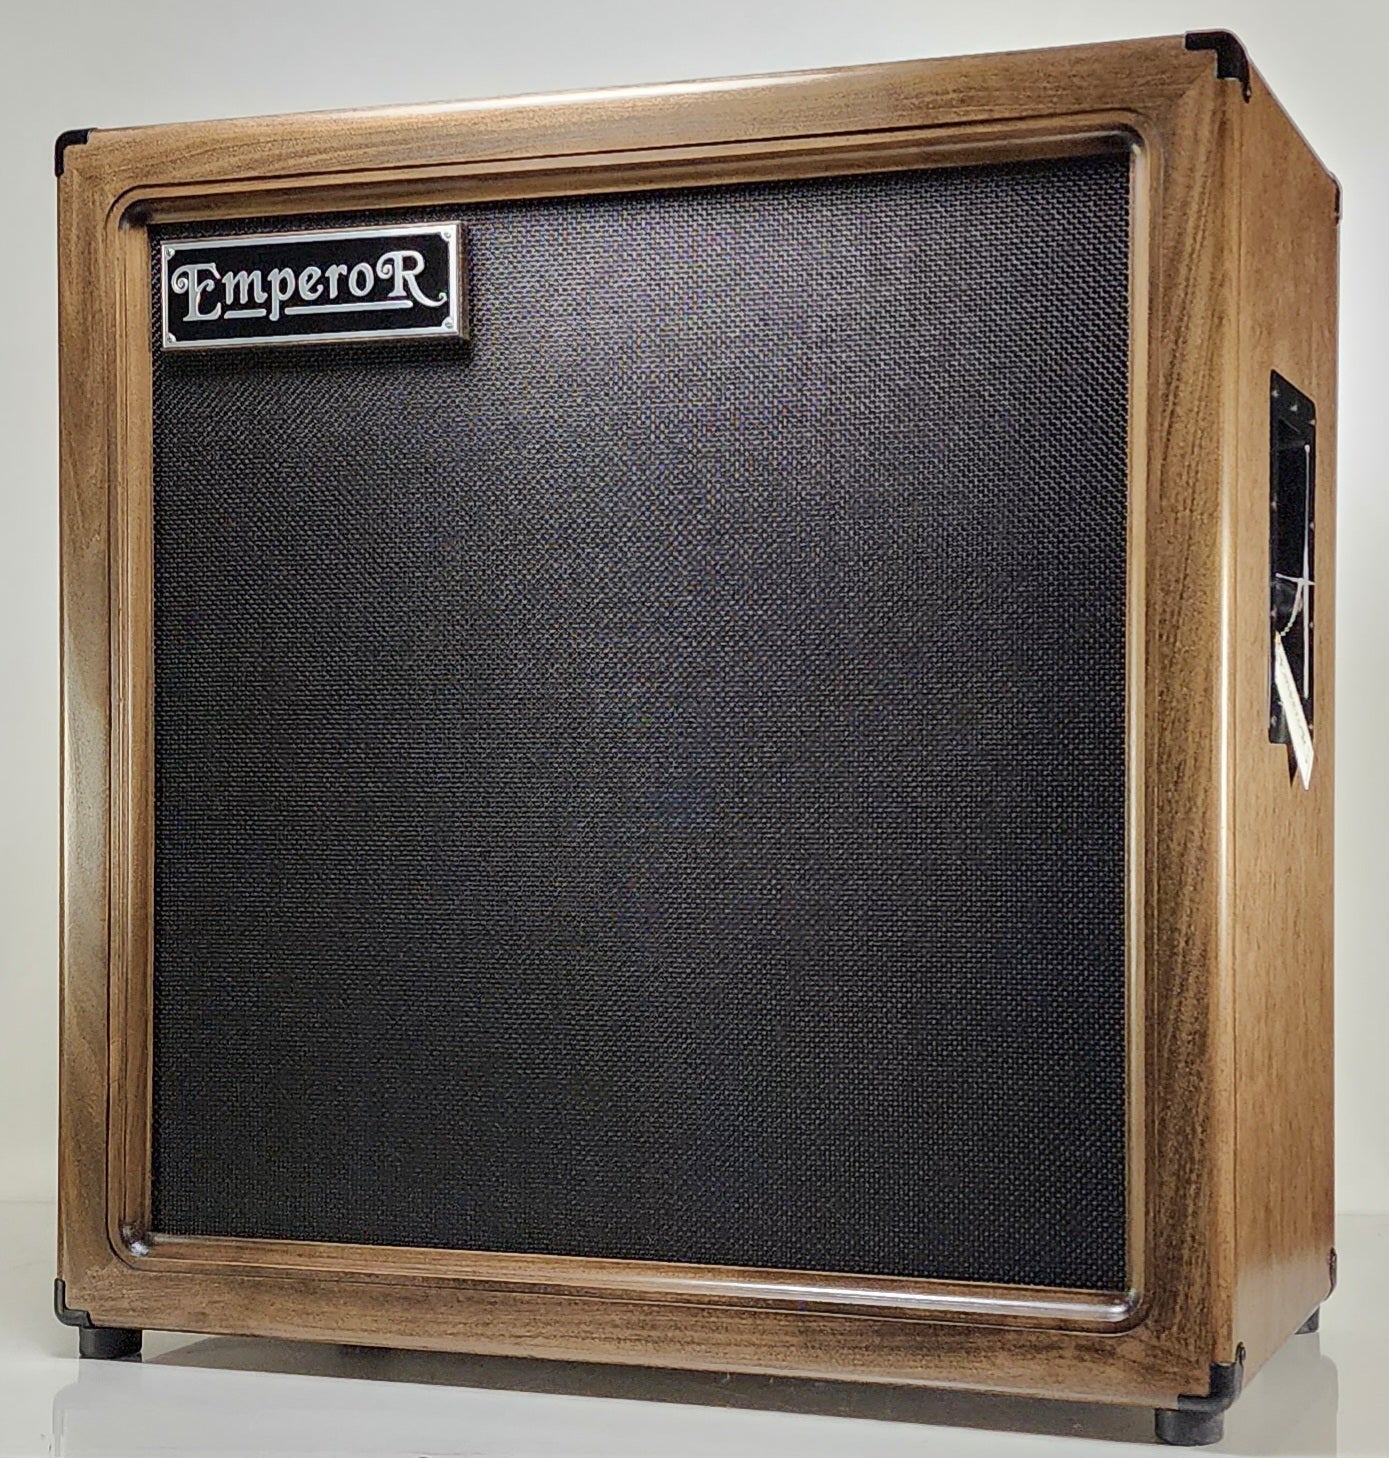 Standard 2x15 SS Guitar Cabinet - Emperor Cabinets